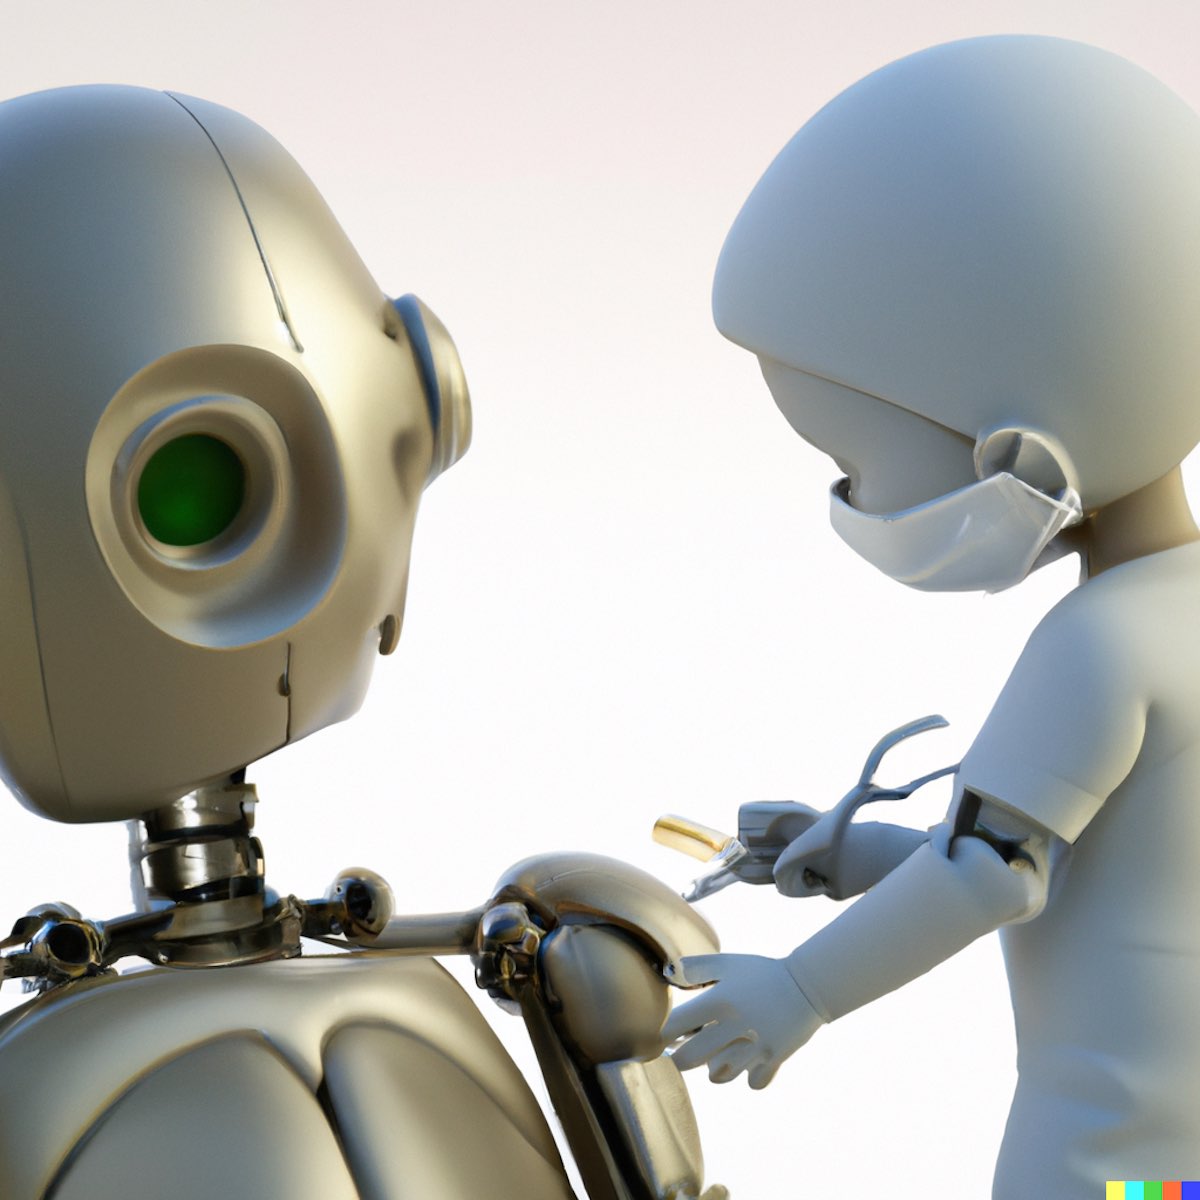 "3D render of a droid helping doctor in a heart surgery"
